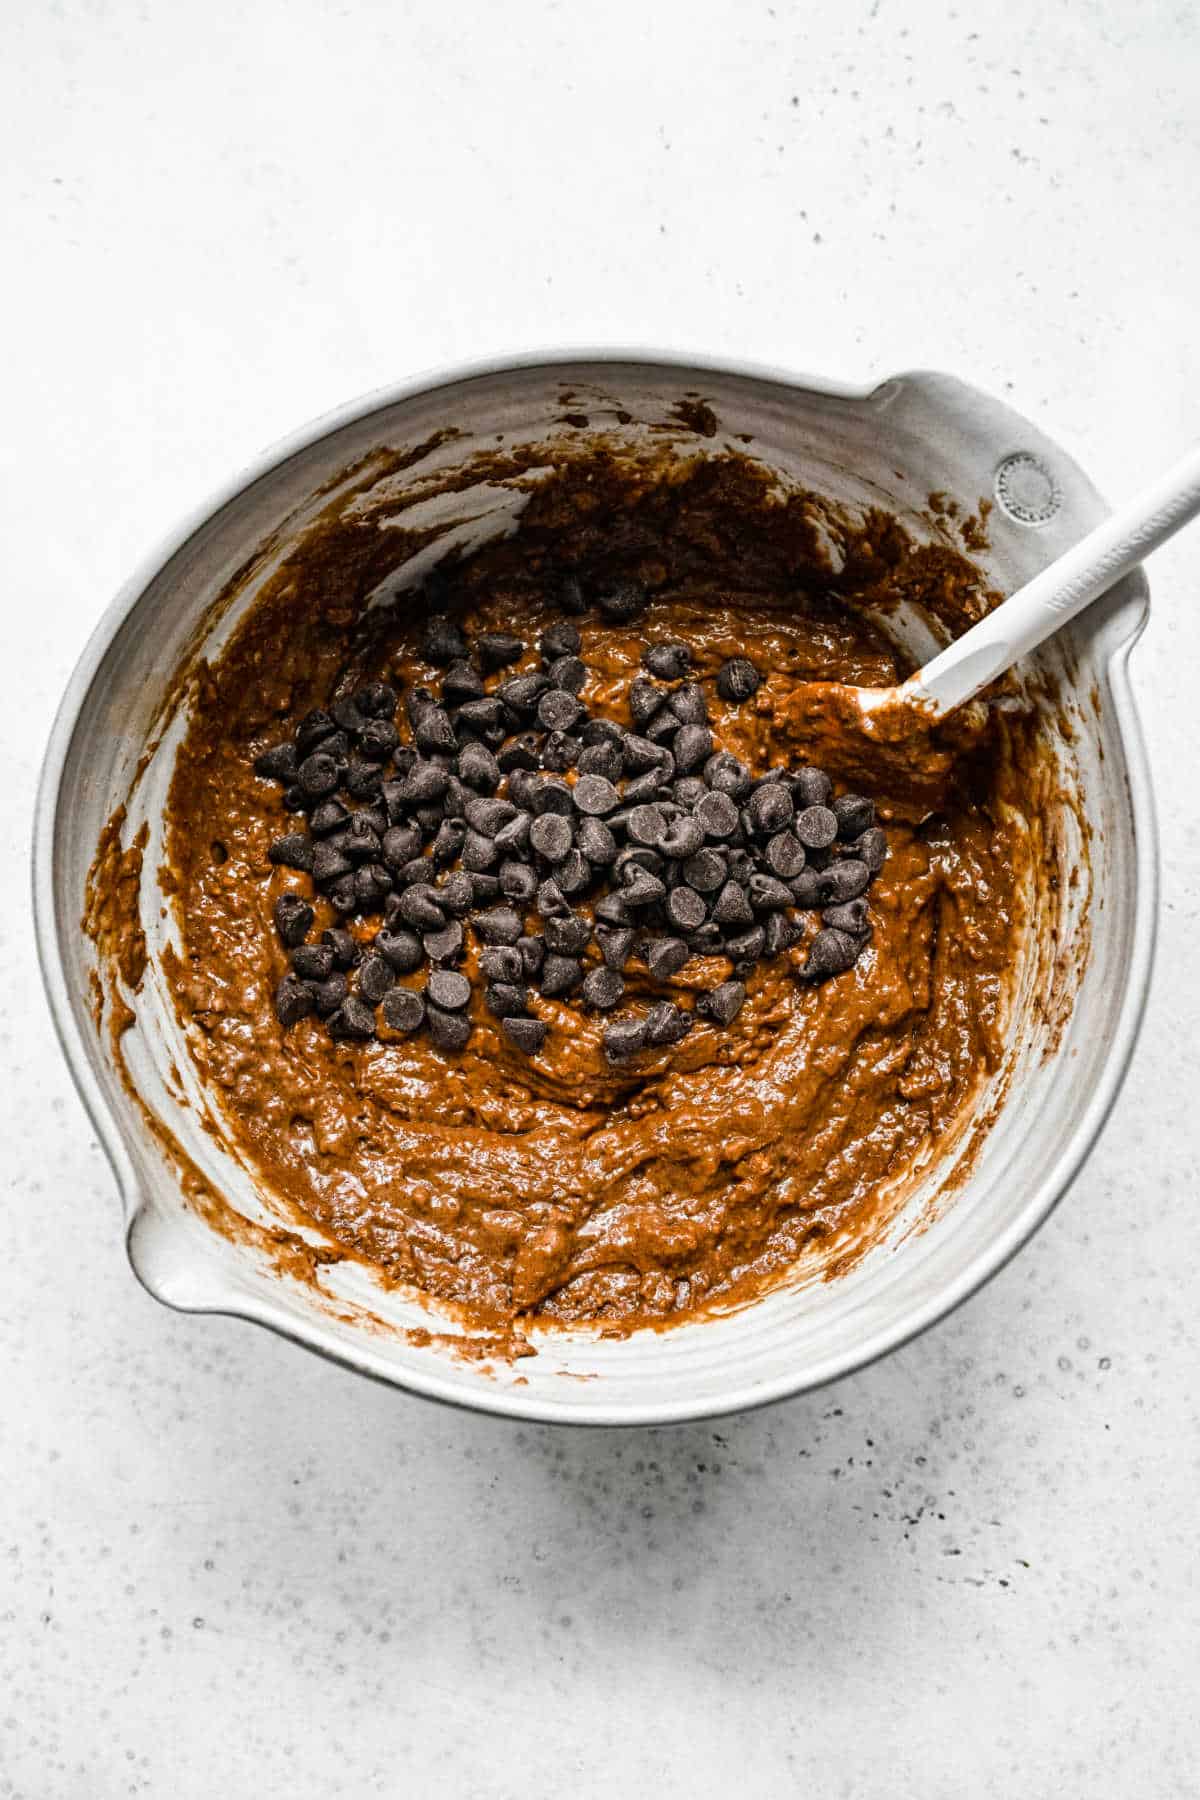 Chocolate chips on top of chocolate cake batter. 